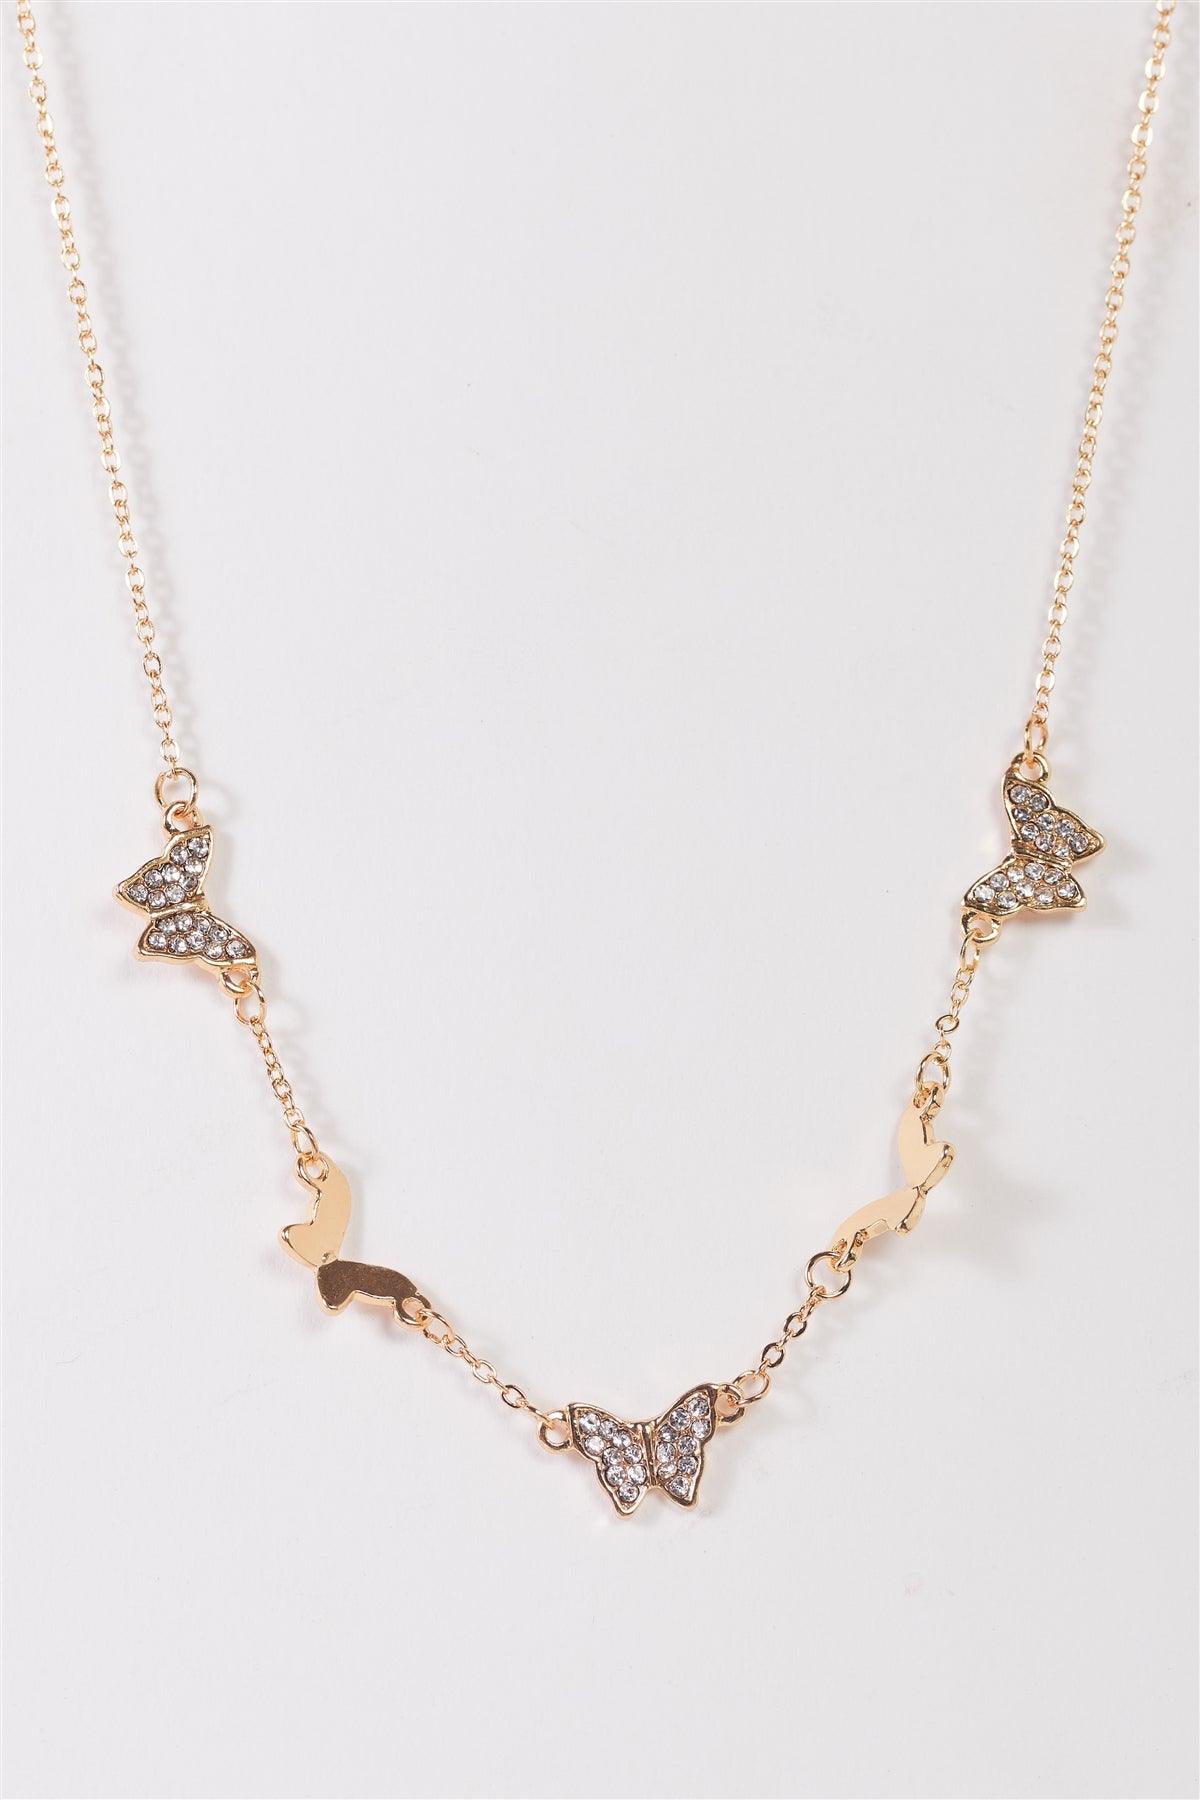 Gold Thin Linked Chain With Gold & Crystal Butterfly Pendants Necklace /3 Pieces